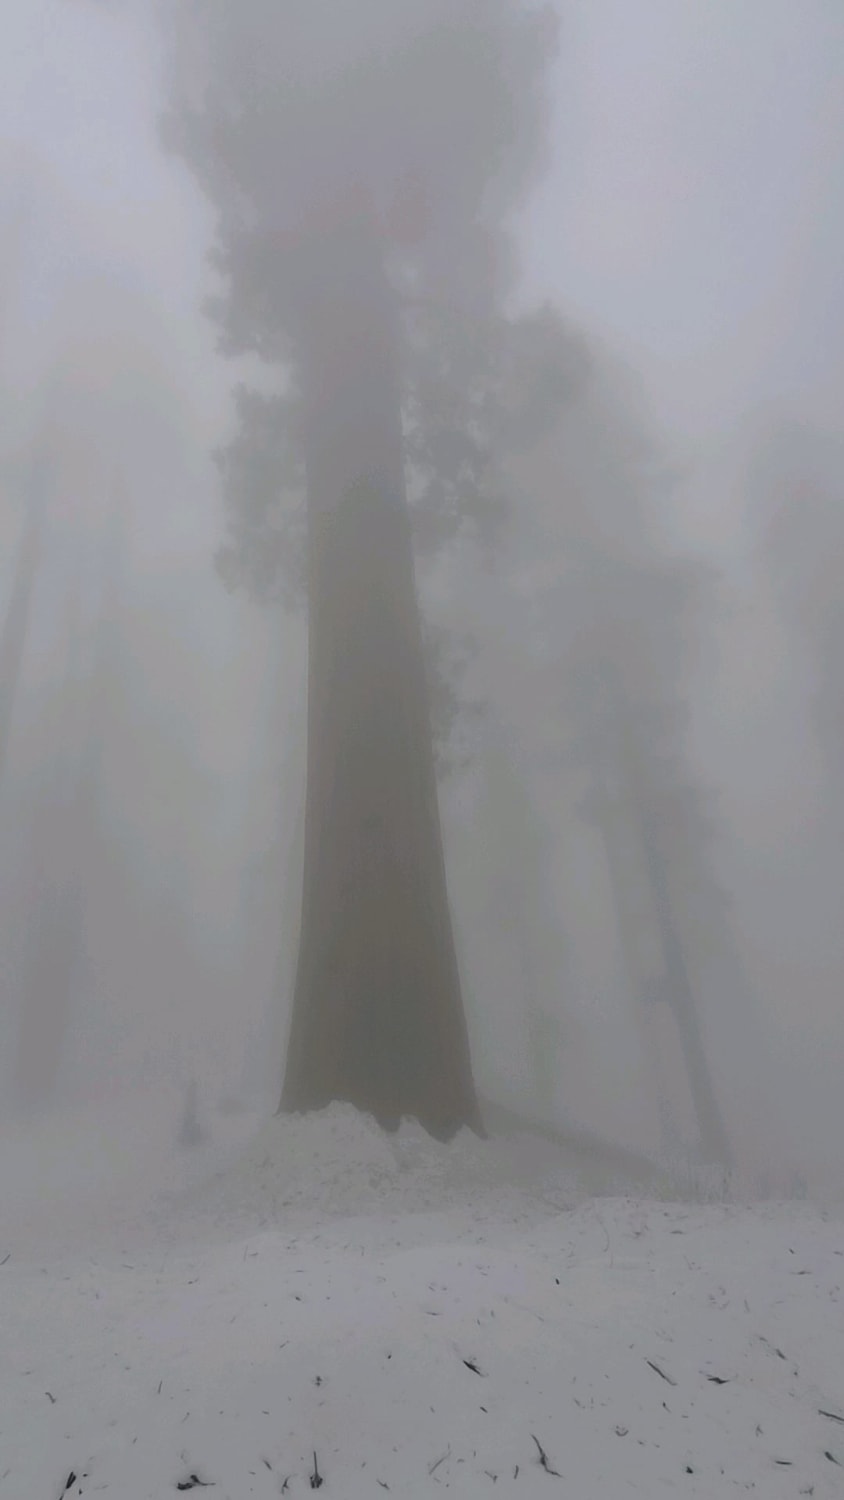 Hiking among the giants in the fog, in Sequoia National Park